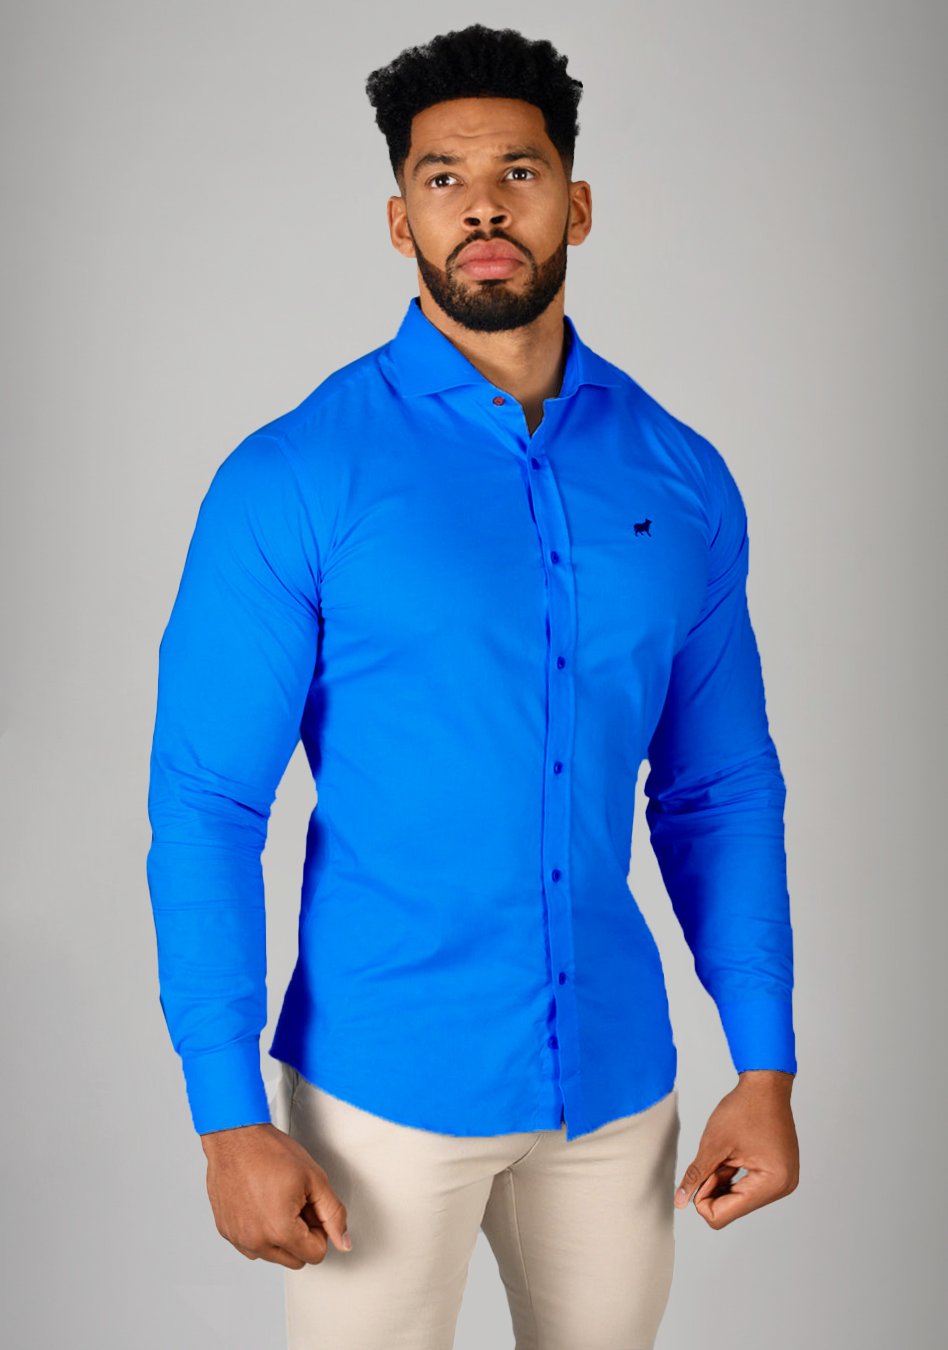 Electric Blue muscle fit shirt on an athletically built model, showcasing the athletic fit design that enhances physique, with stretch fabric for comfort and mobility